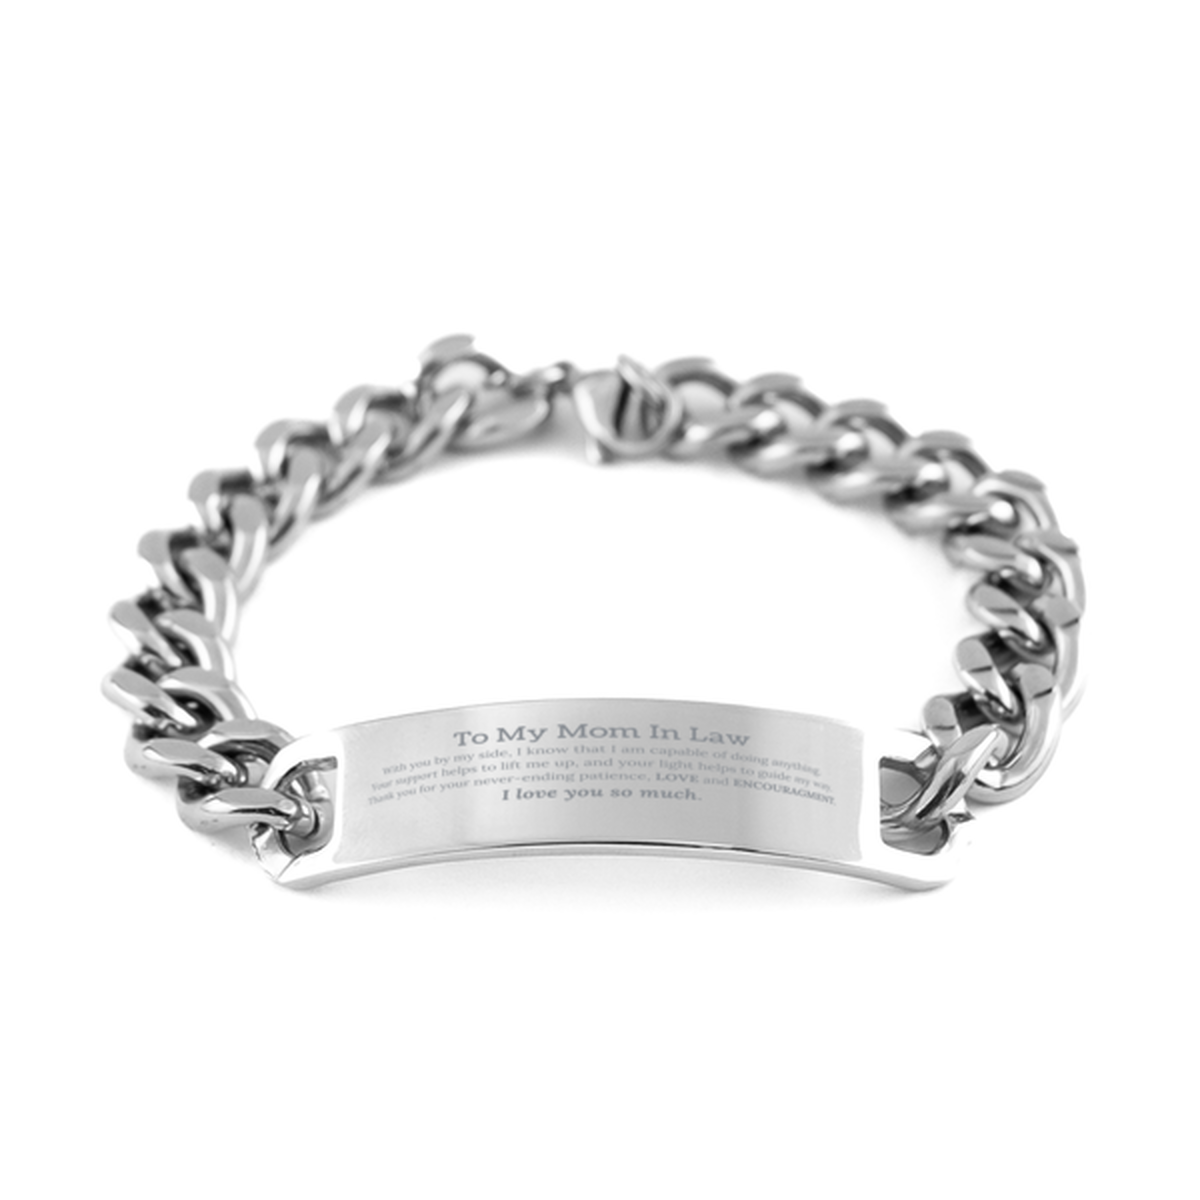 Appreciation Mom In Law Cuban Chain Stainless Steel Bracelet Gifts, To My Mom In Law Birthday Christmas Wedding Keepsake Gifts for Mom In Law With you by my side, I know that I am capable of doing anything. I love you so much